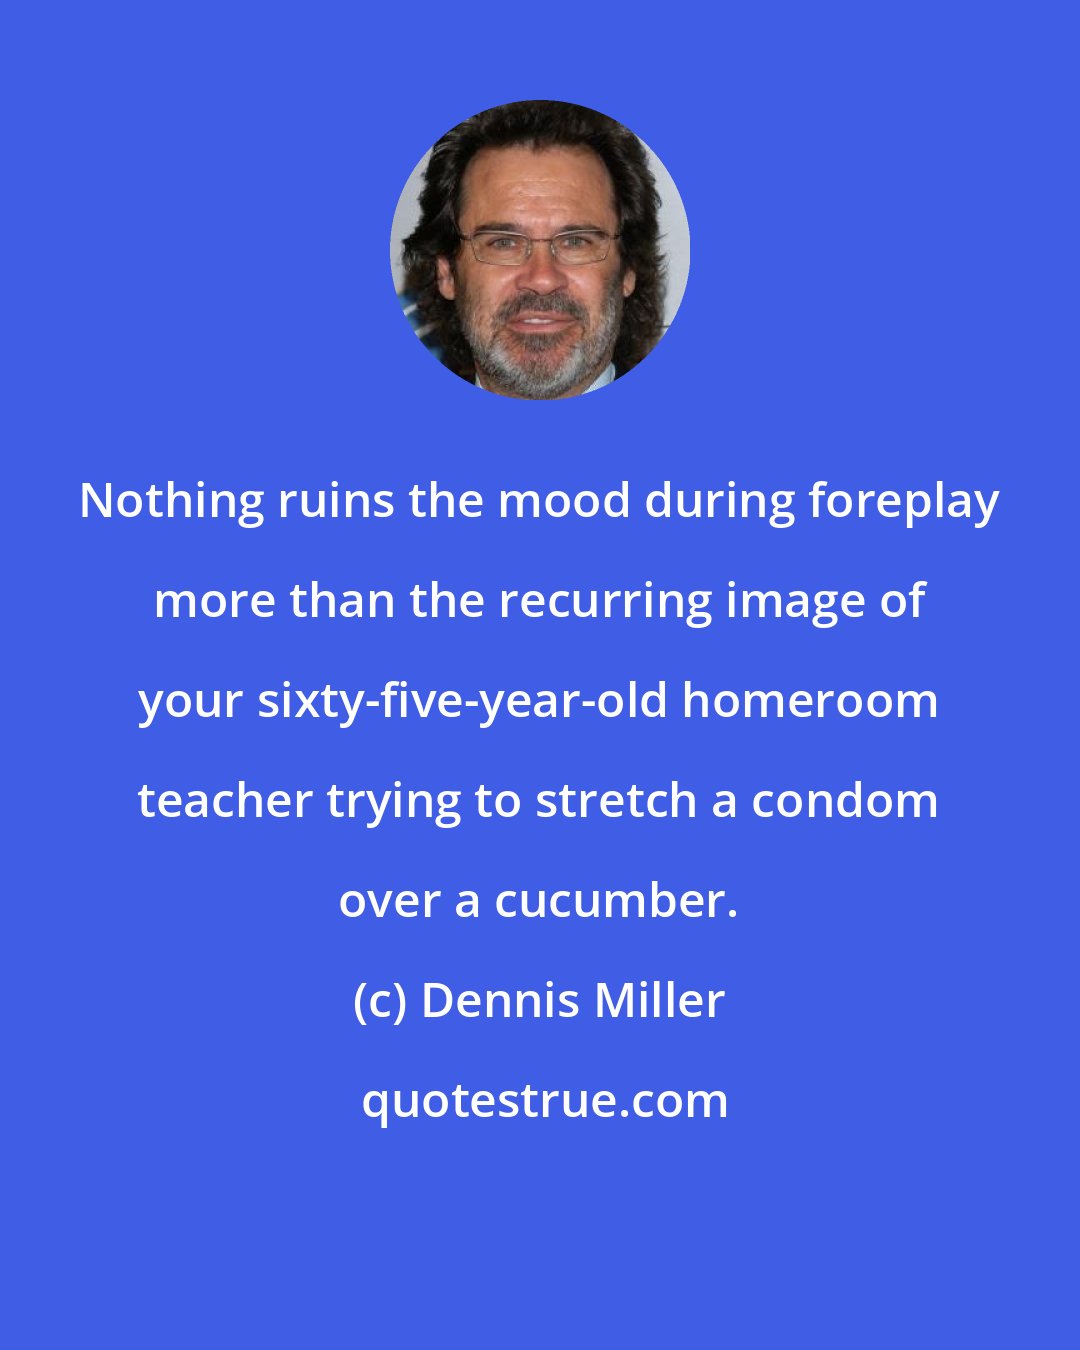 Dennis Miller: Nothing ruins the mood during foreplay more than the recurring image of your sixty-five-year-old homeroom teacher trying to stretch a condom over a cucumber.